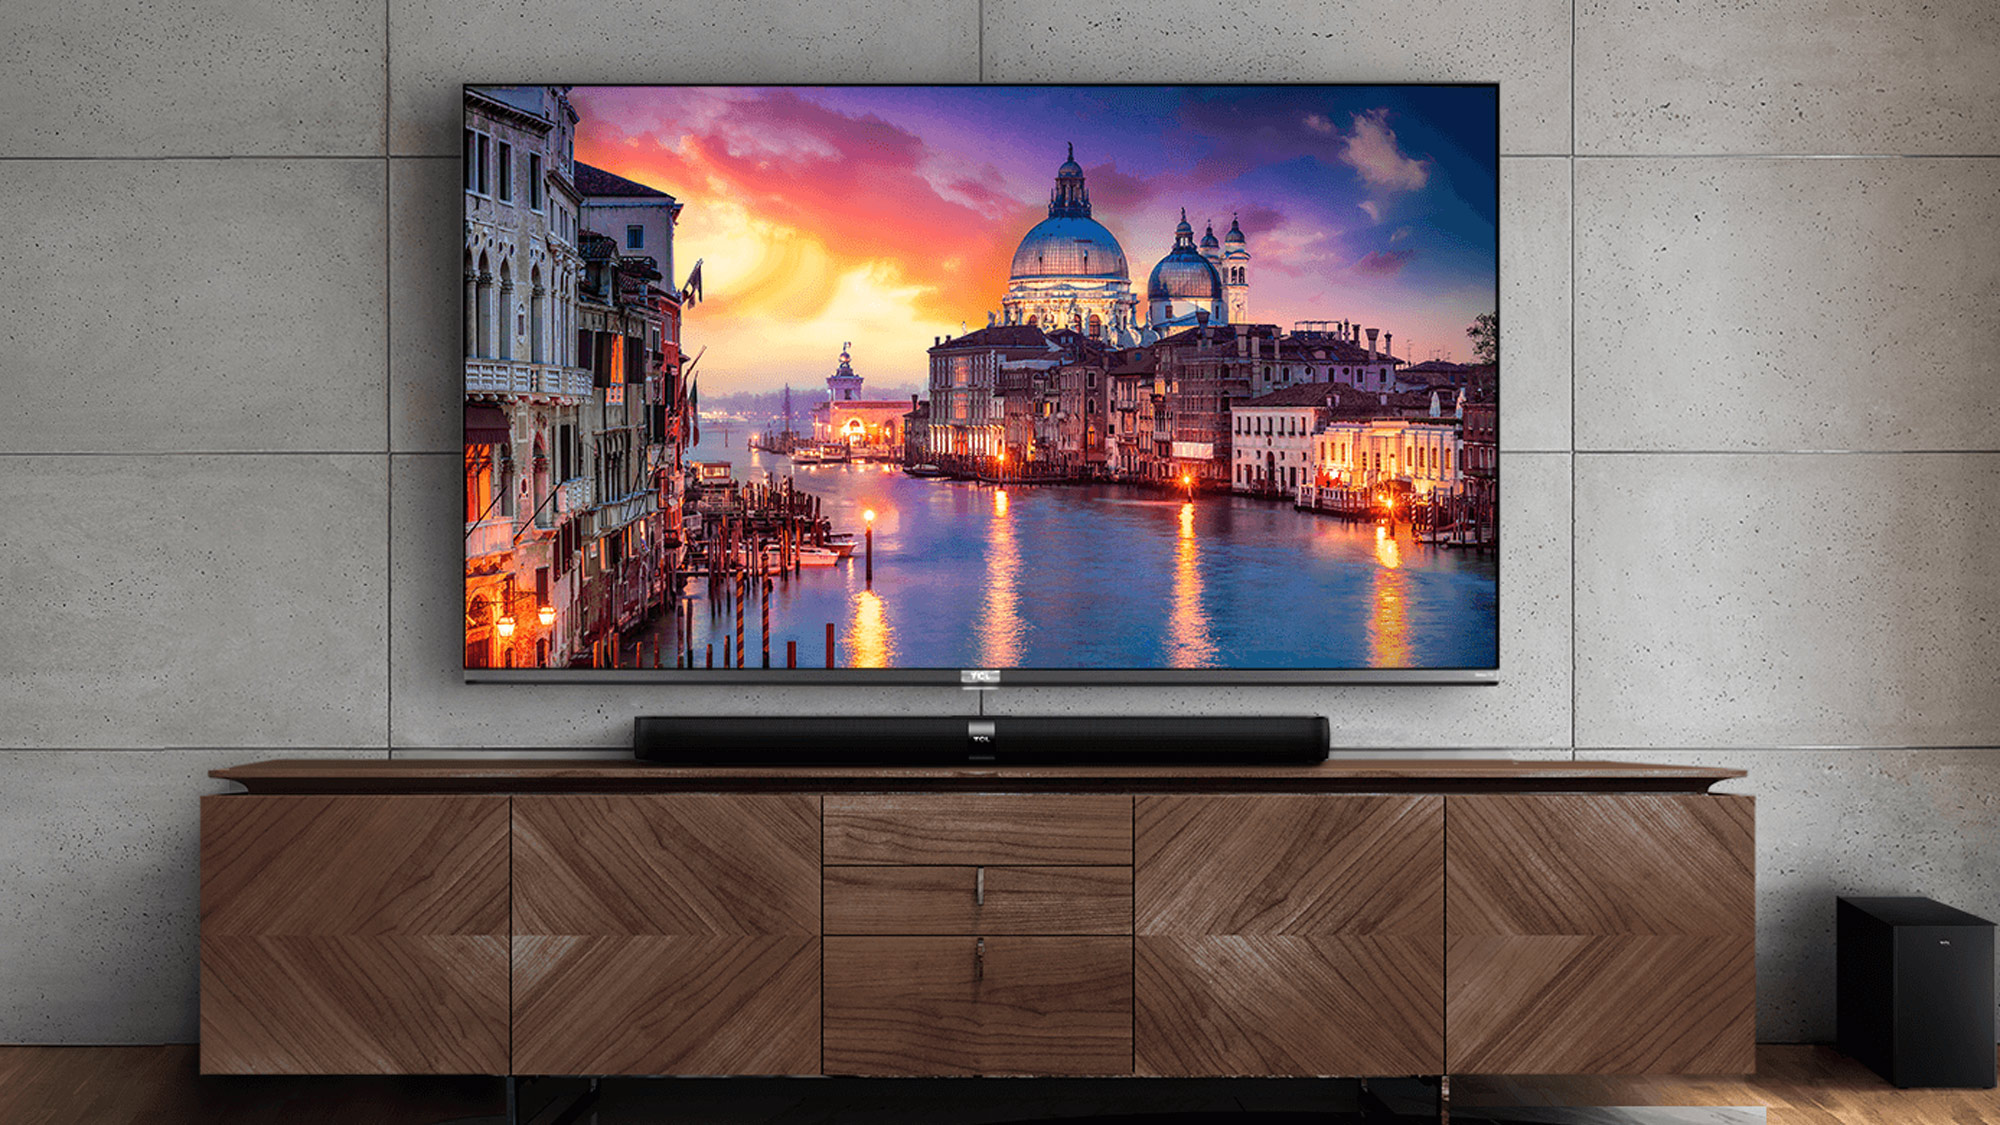 The 3 Best TCL TVs Of 2022 [Buyer’s Guide ]